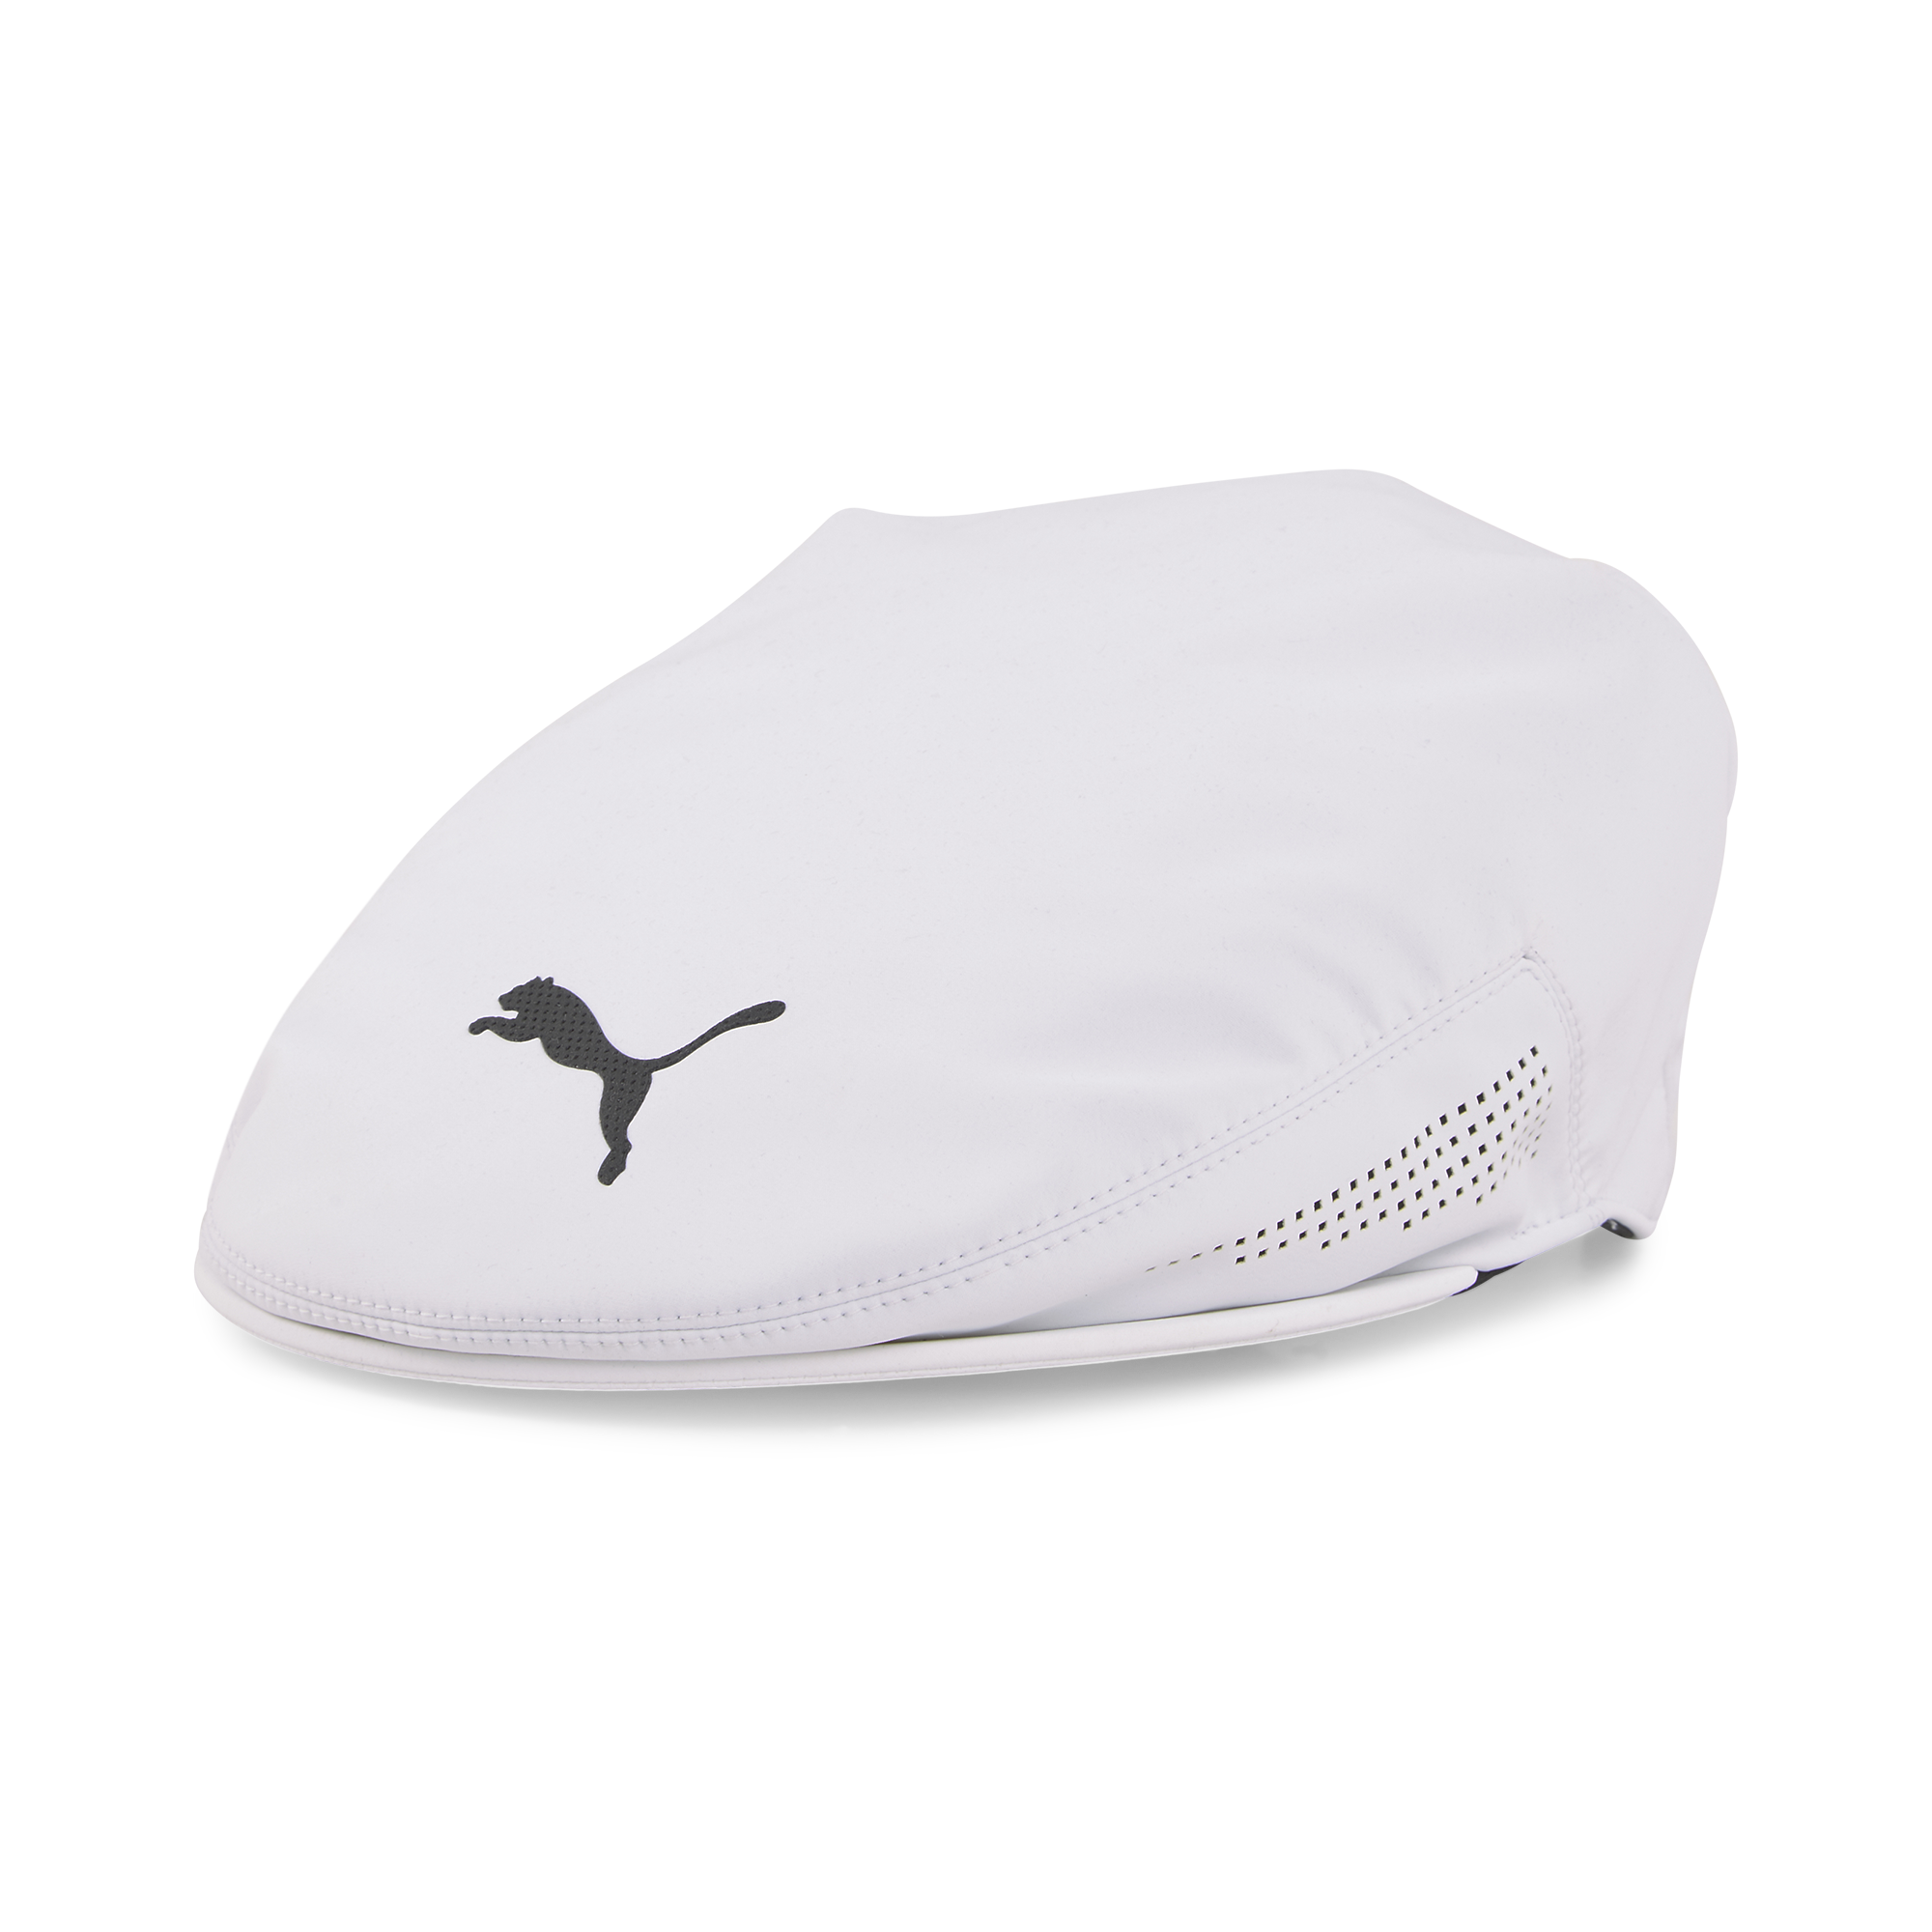 White 'Tour Driver' Snapback Cap - One Size Fit Most